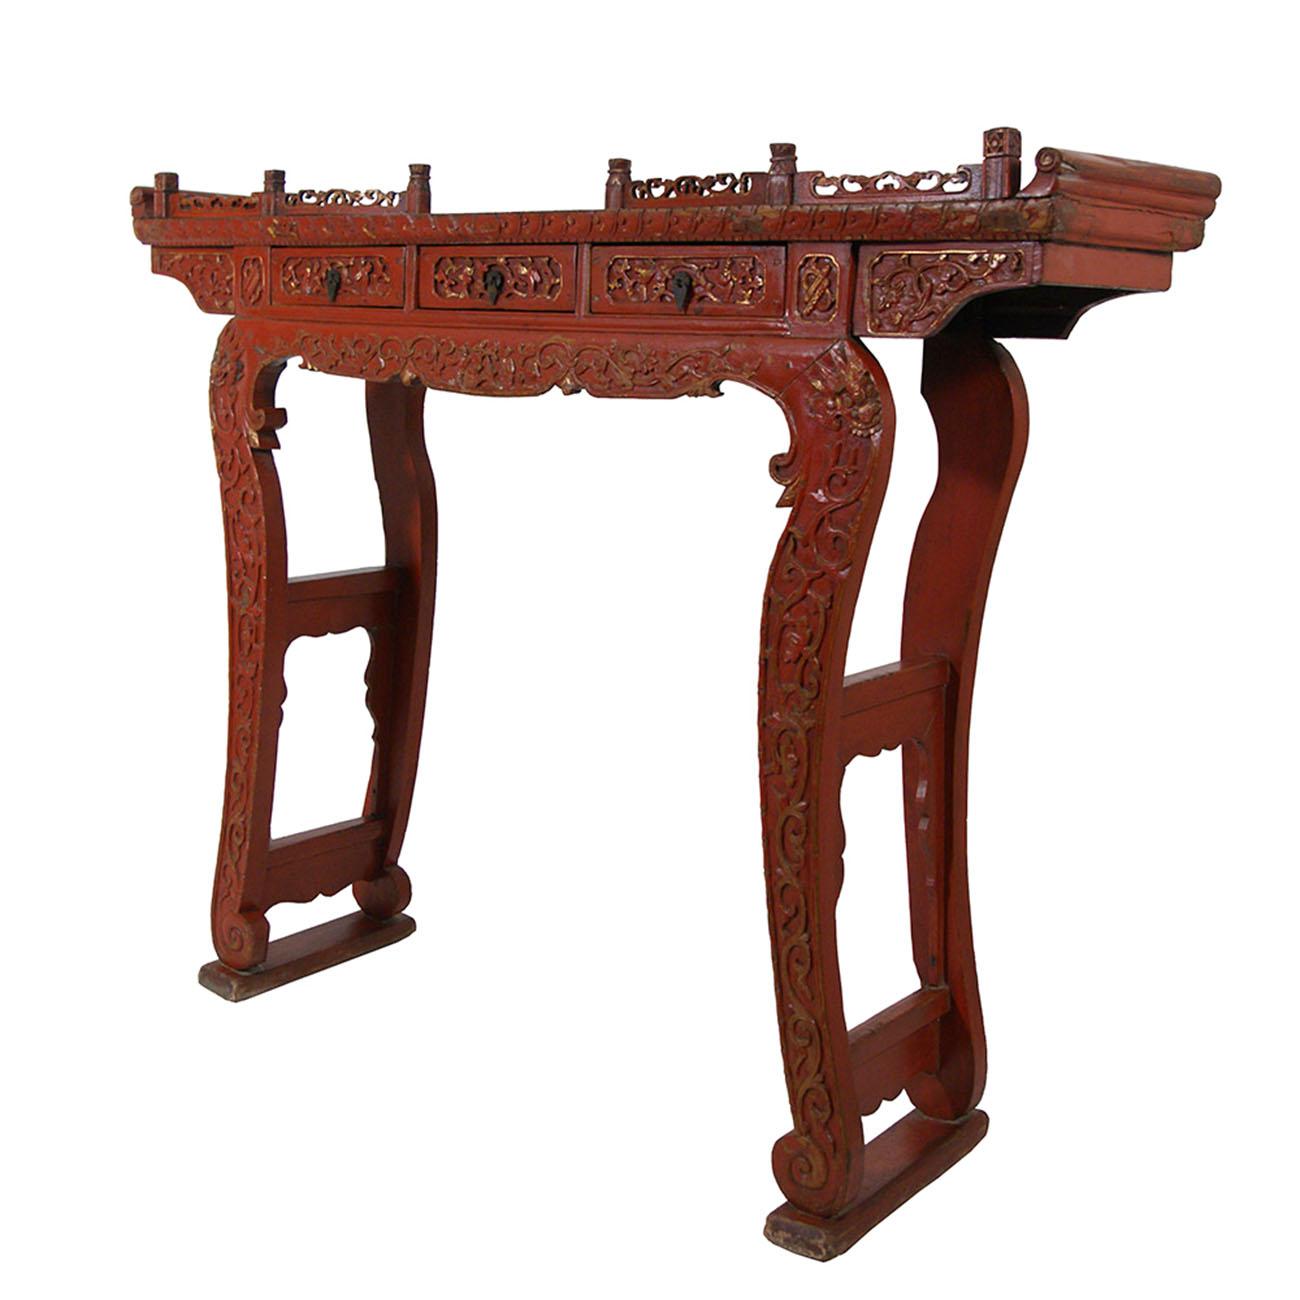 Size: 45in H x 59 1/2in W x 14in D
Drawer: 2 1/2in H x 9 1/2in W x 10in D
Origin: Fujian, China
Circa: 1850 - 1900
Material: Fir wood
Condition: Original finish, solid wood construction, hand carved, sturdy, normal age wear.
Very well